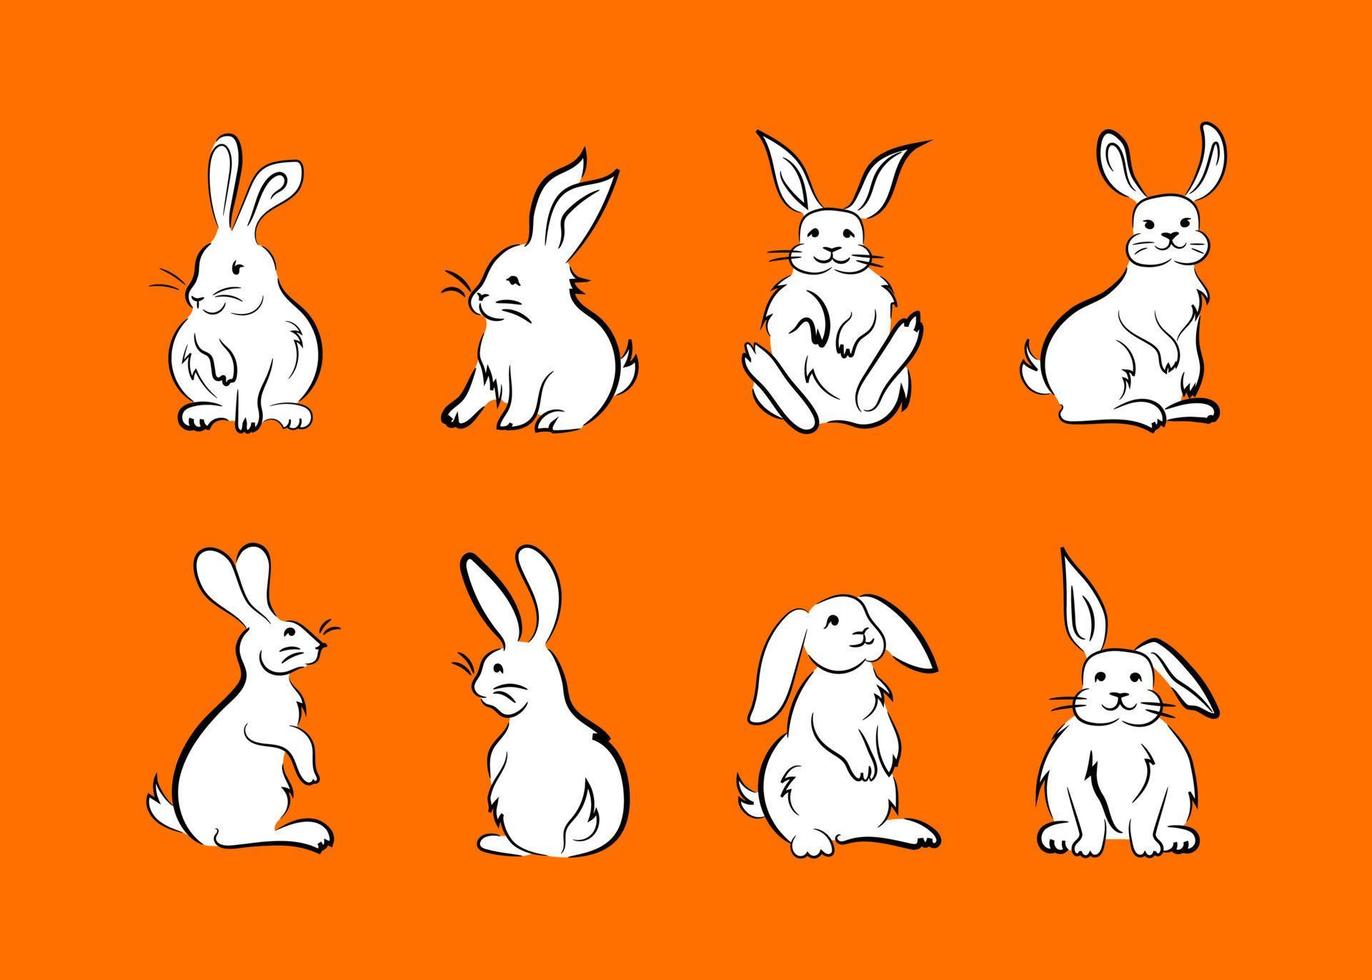 Set of sketch illustrations of cute fluffy rabbits, hares. Bunnies in various poses. Hand-drawn black brush outline and white color fill. Creative clip art made in simple lines, for prints vector